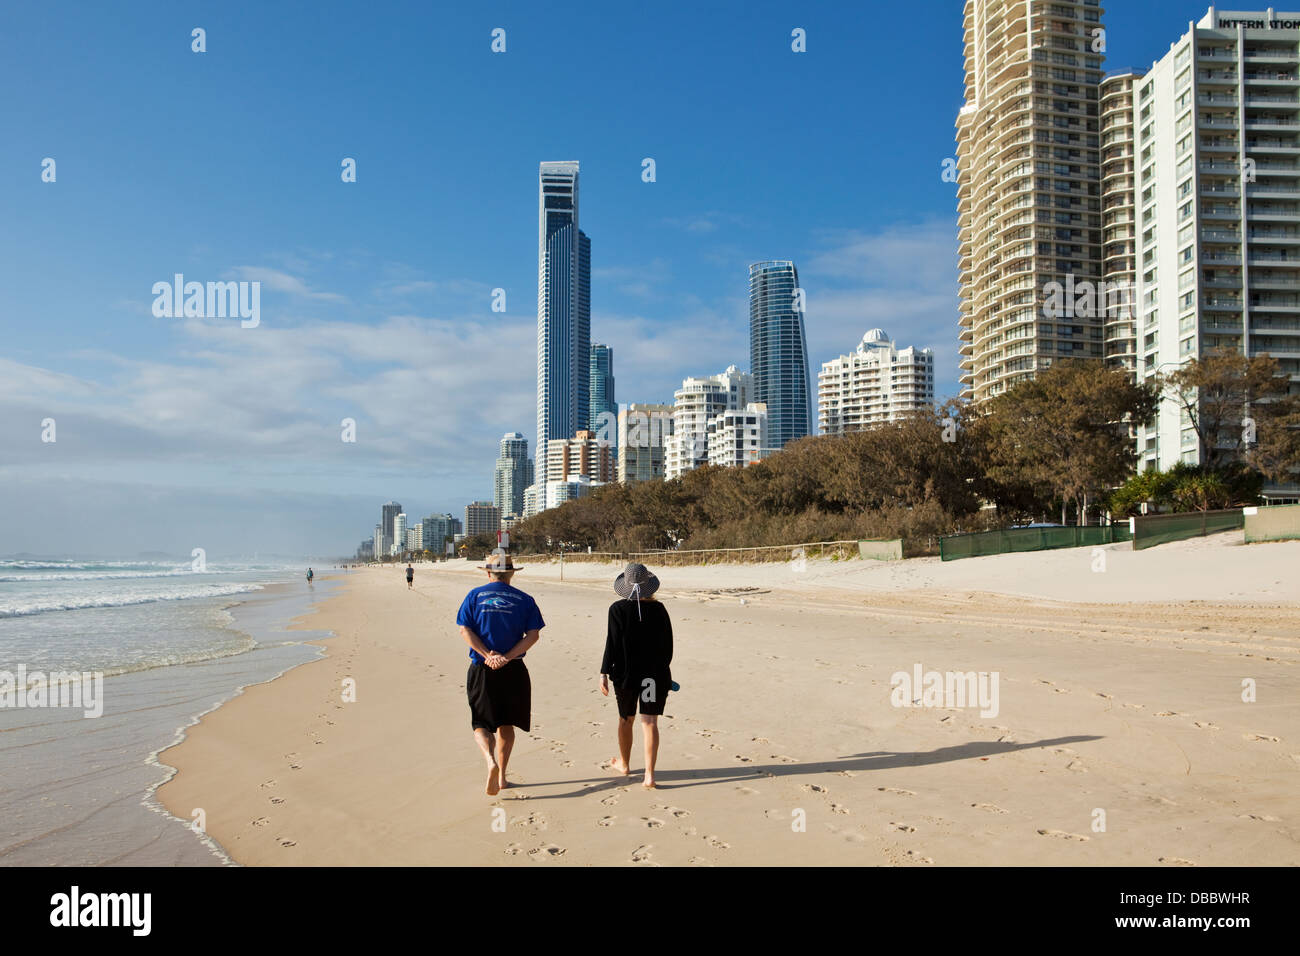 Couple walking along beach with city skyline in background. Surfers Paradise, Gold Coast, Queensland, Australia Stock Photo